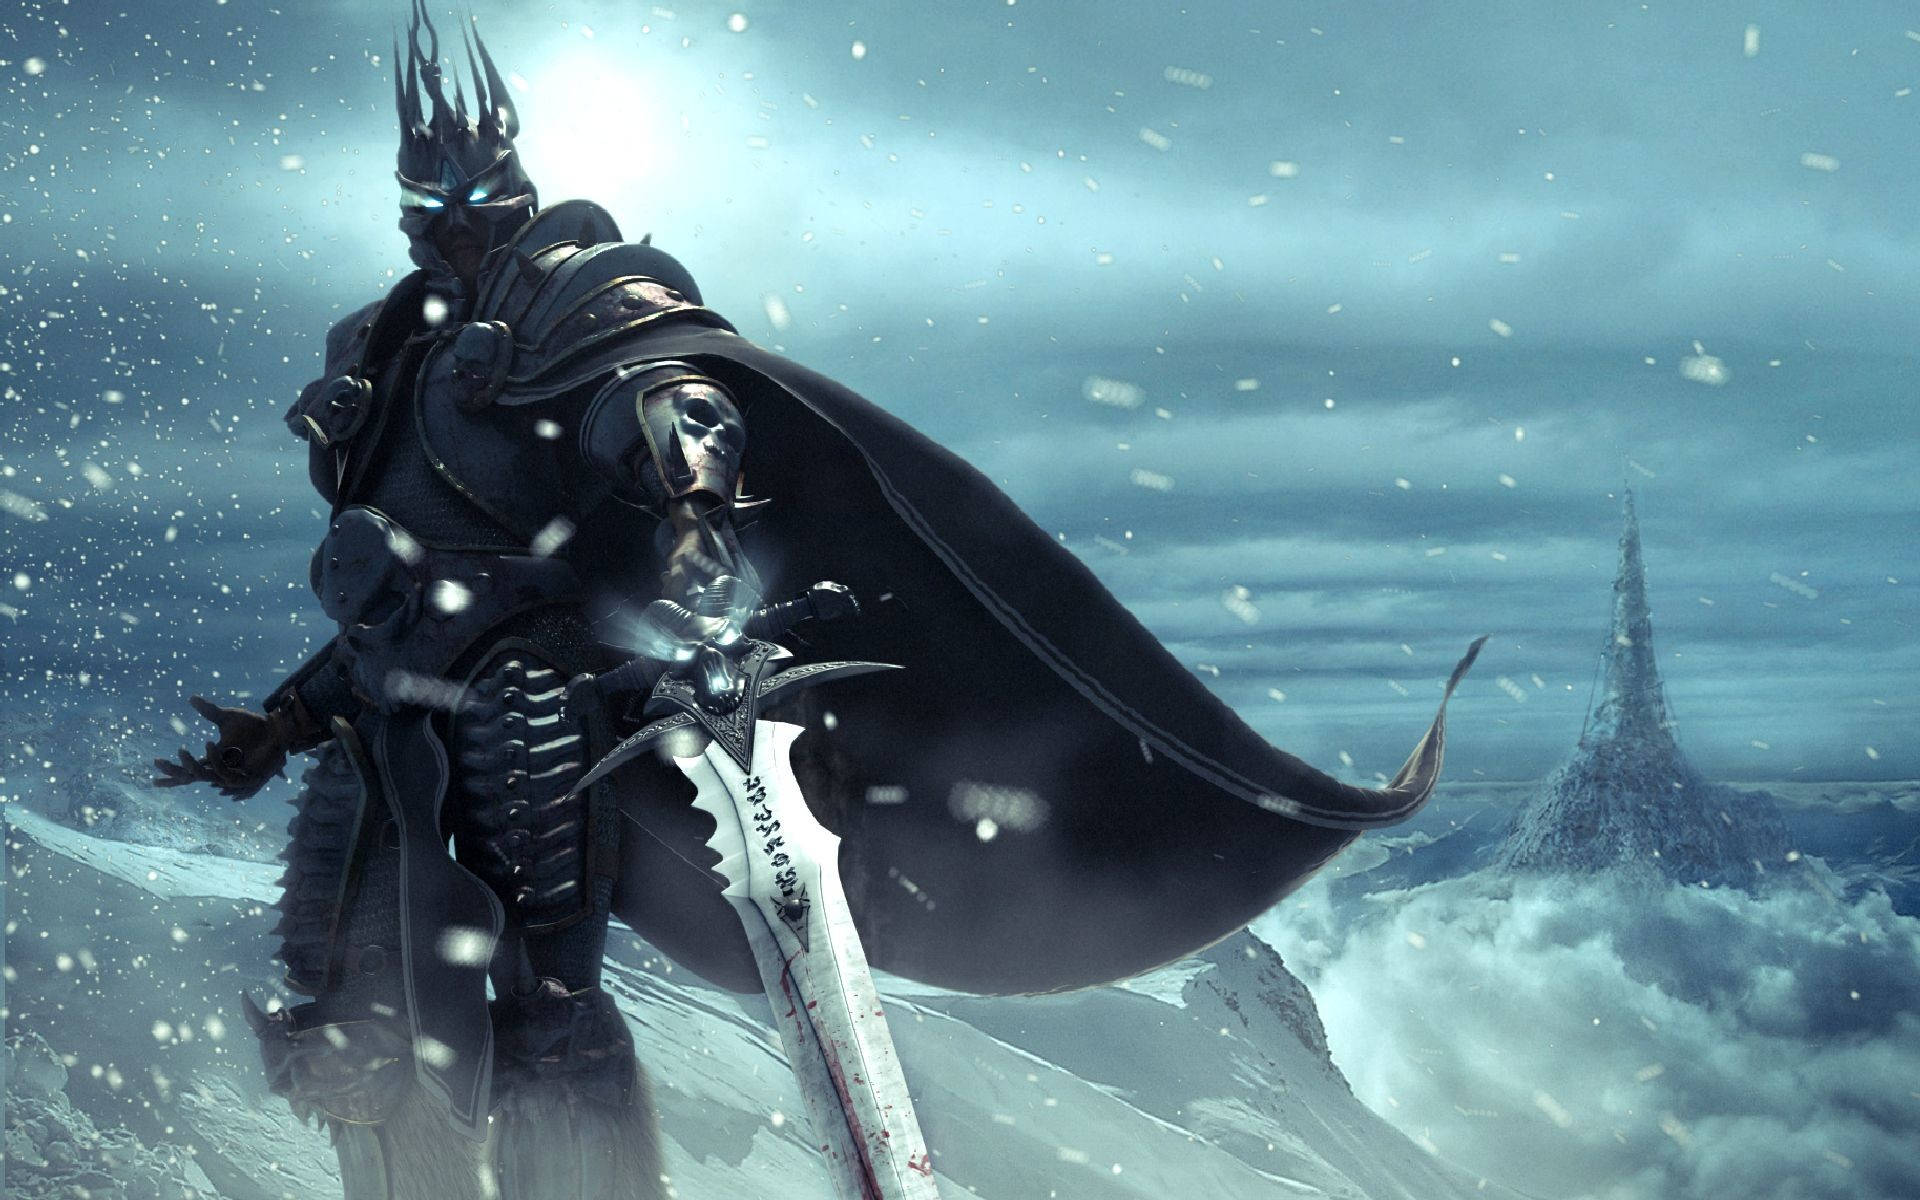 Arthas Menethil As The Death Knight, Poised For Battle Background